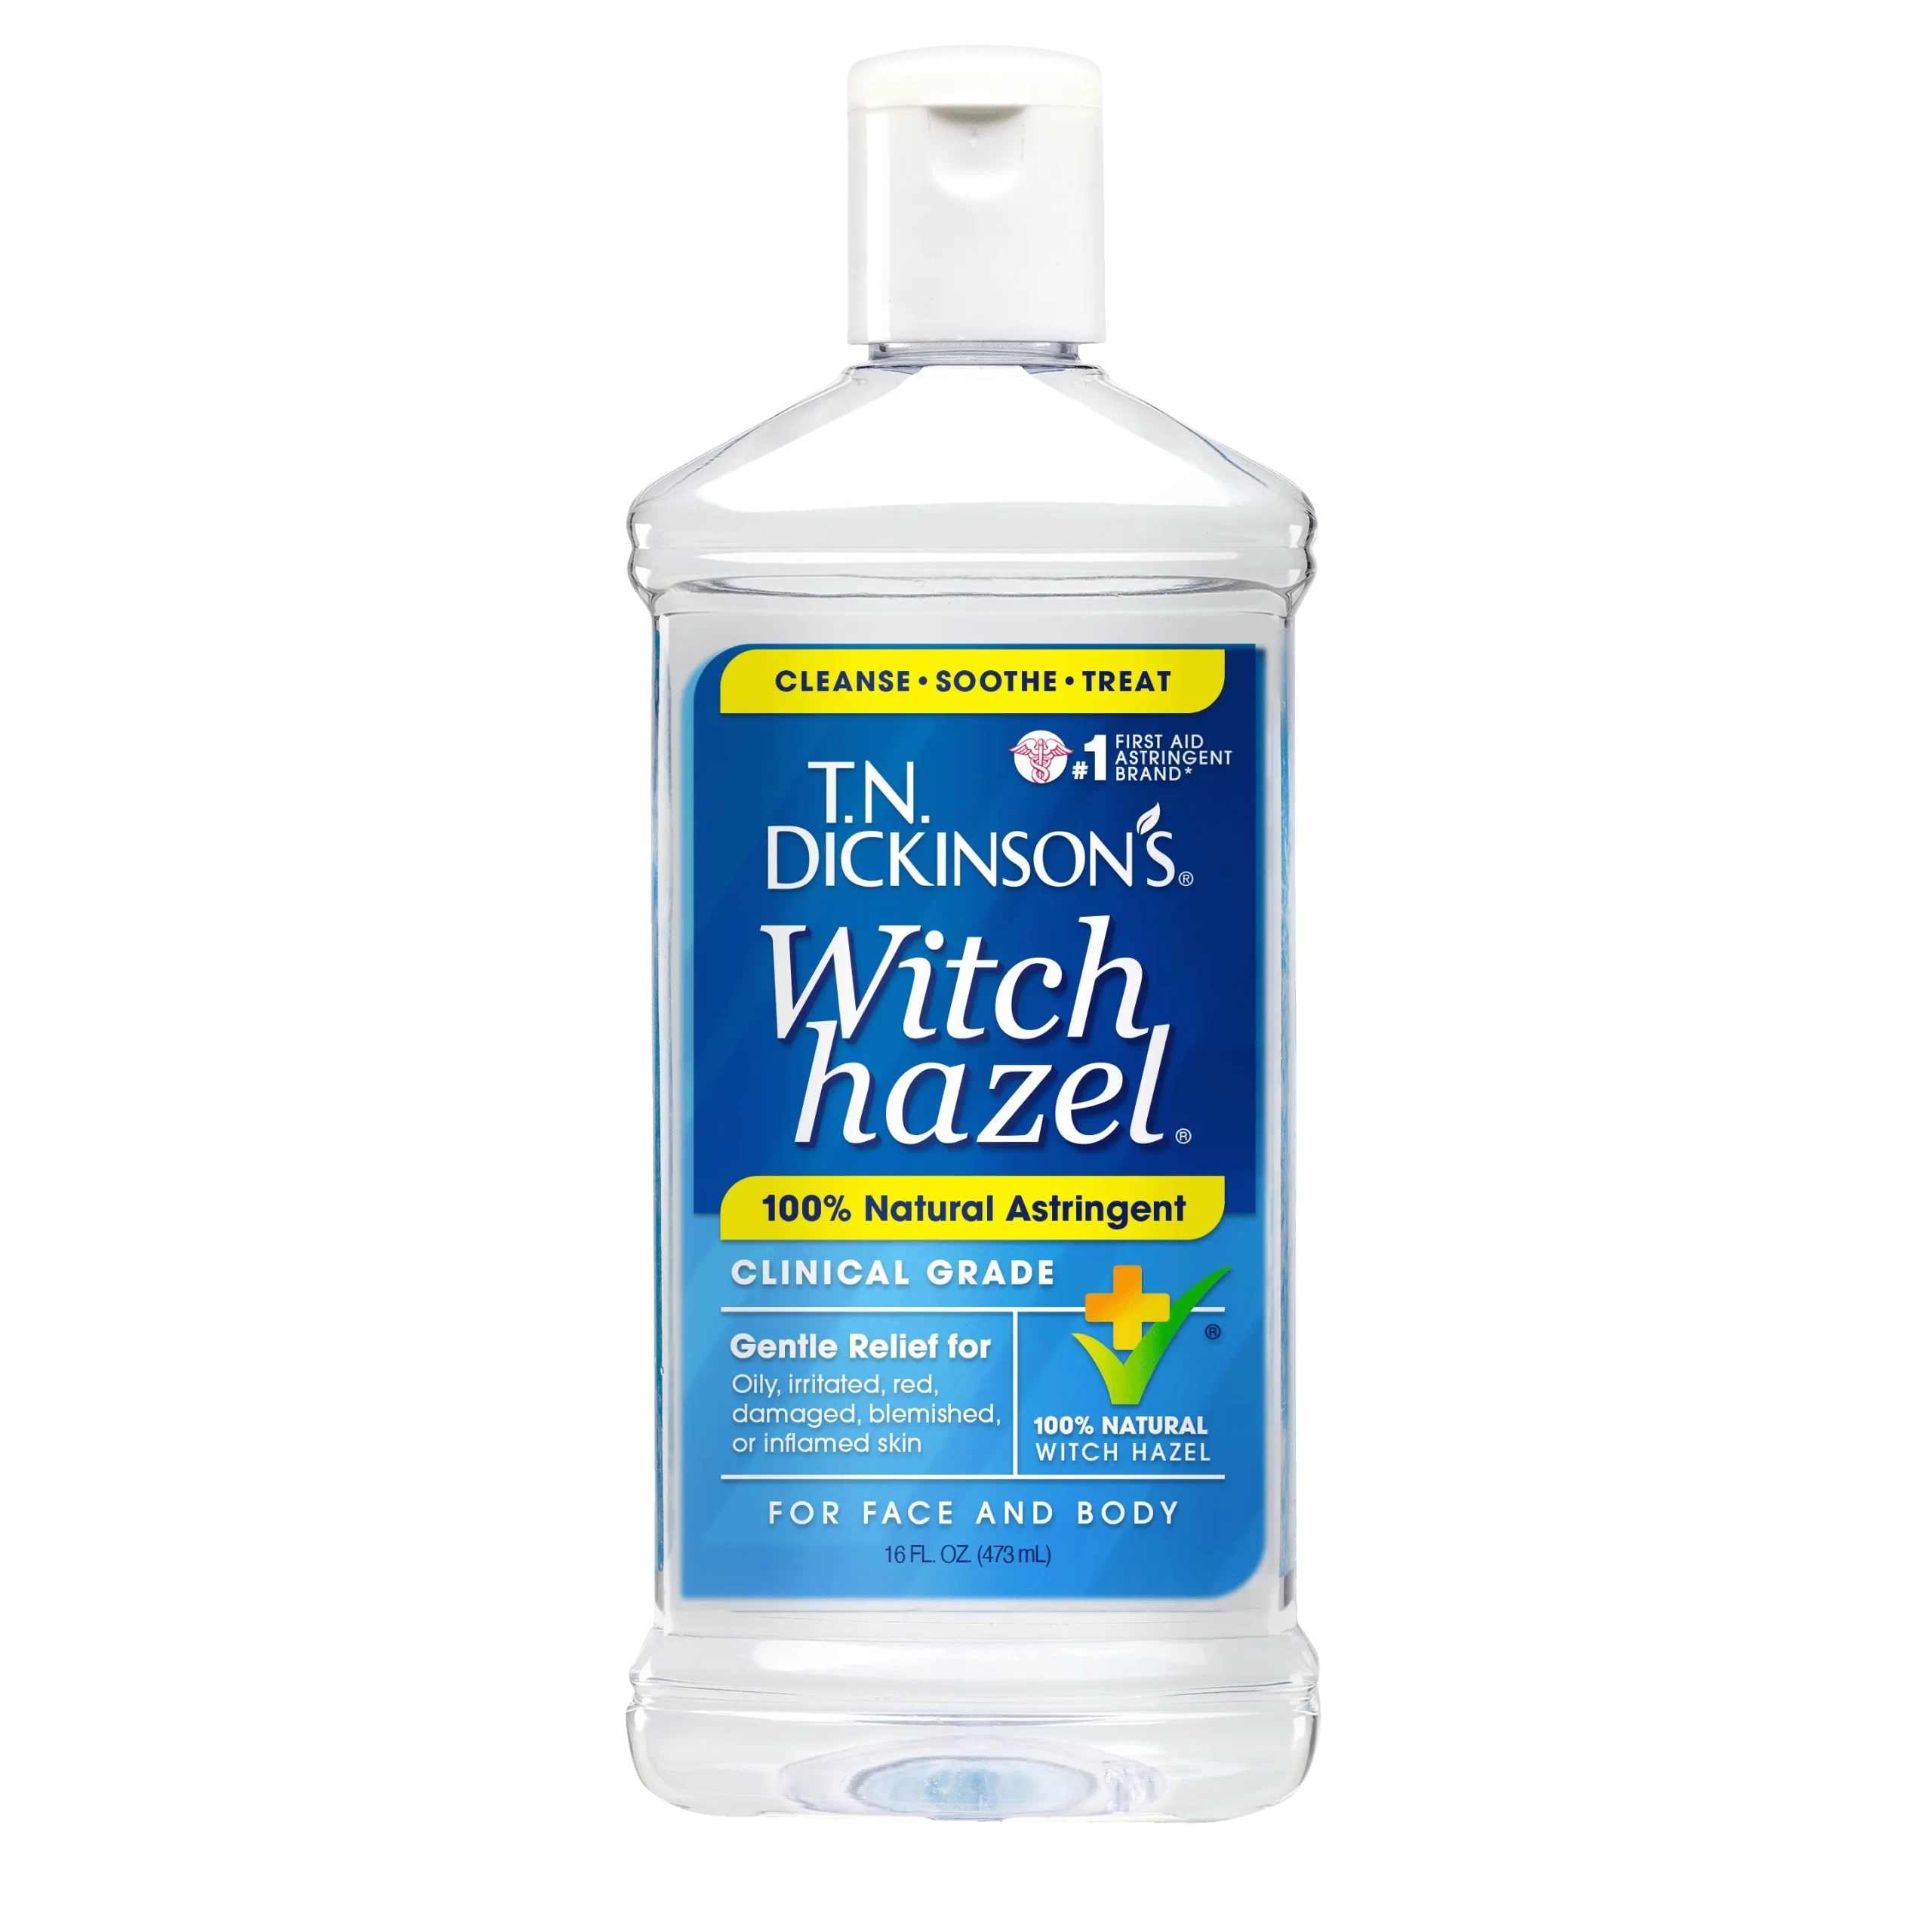 Tn dickinsons witch hazel natural astringent front